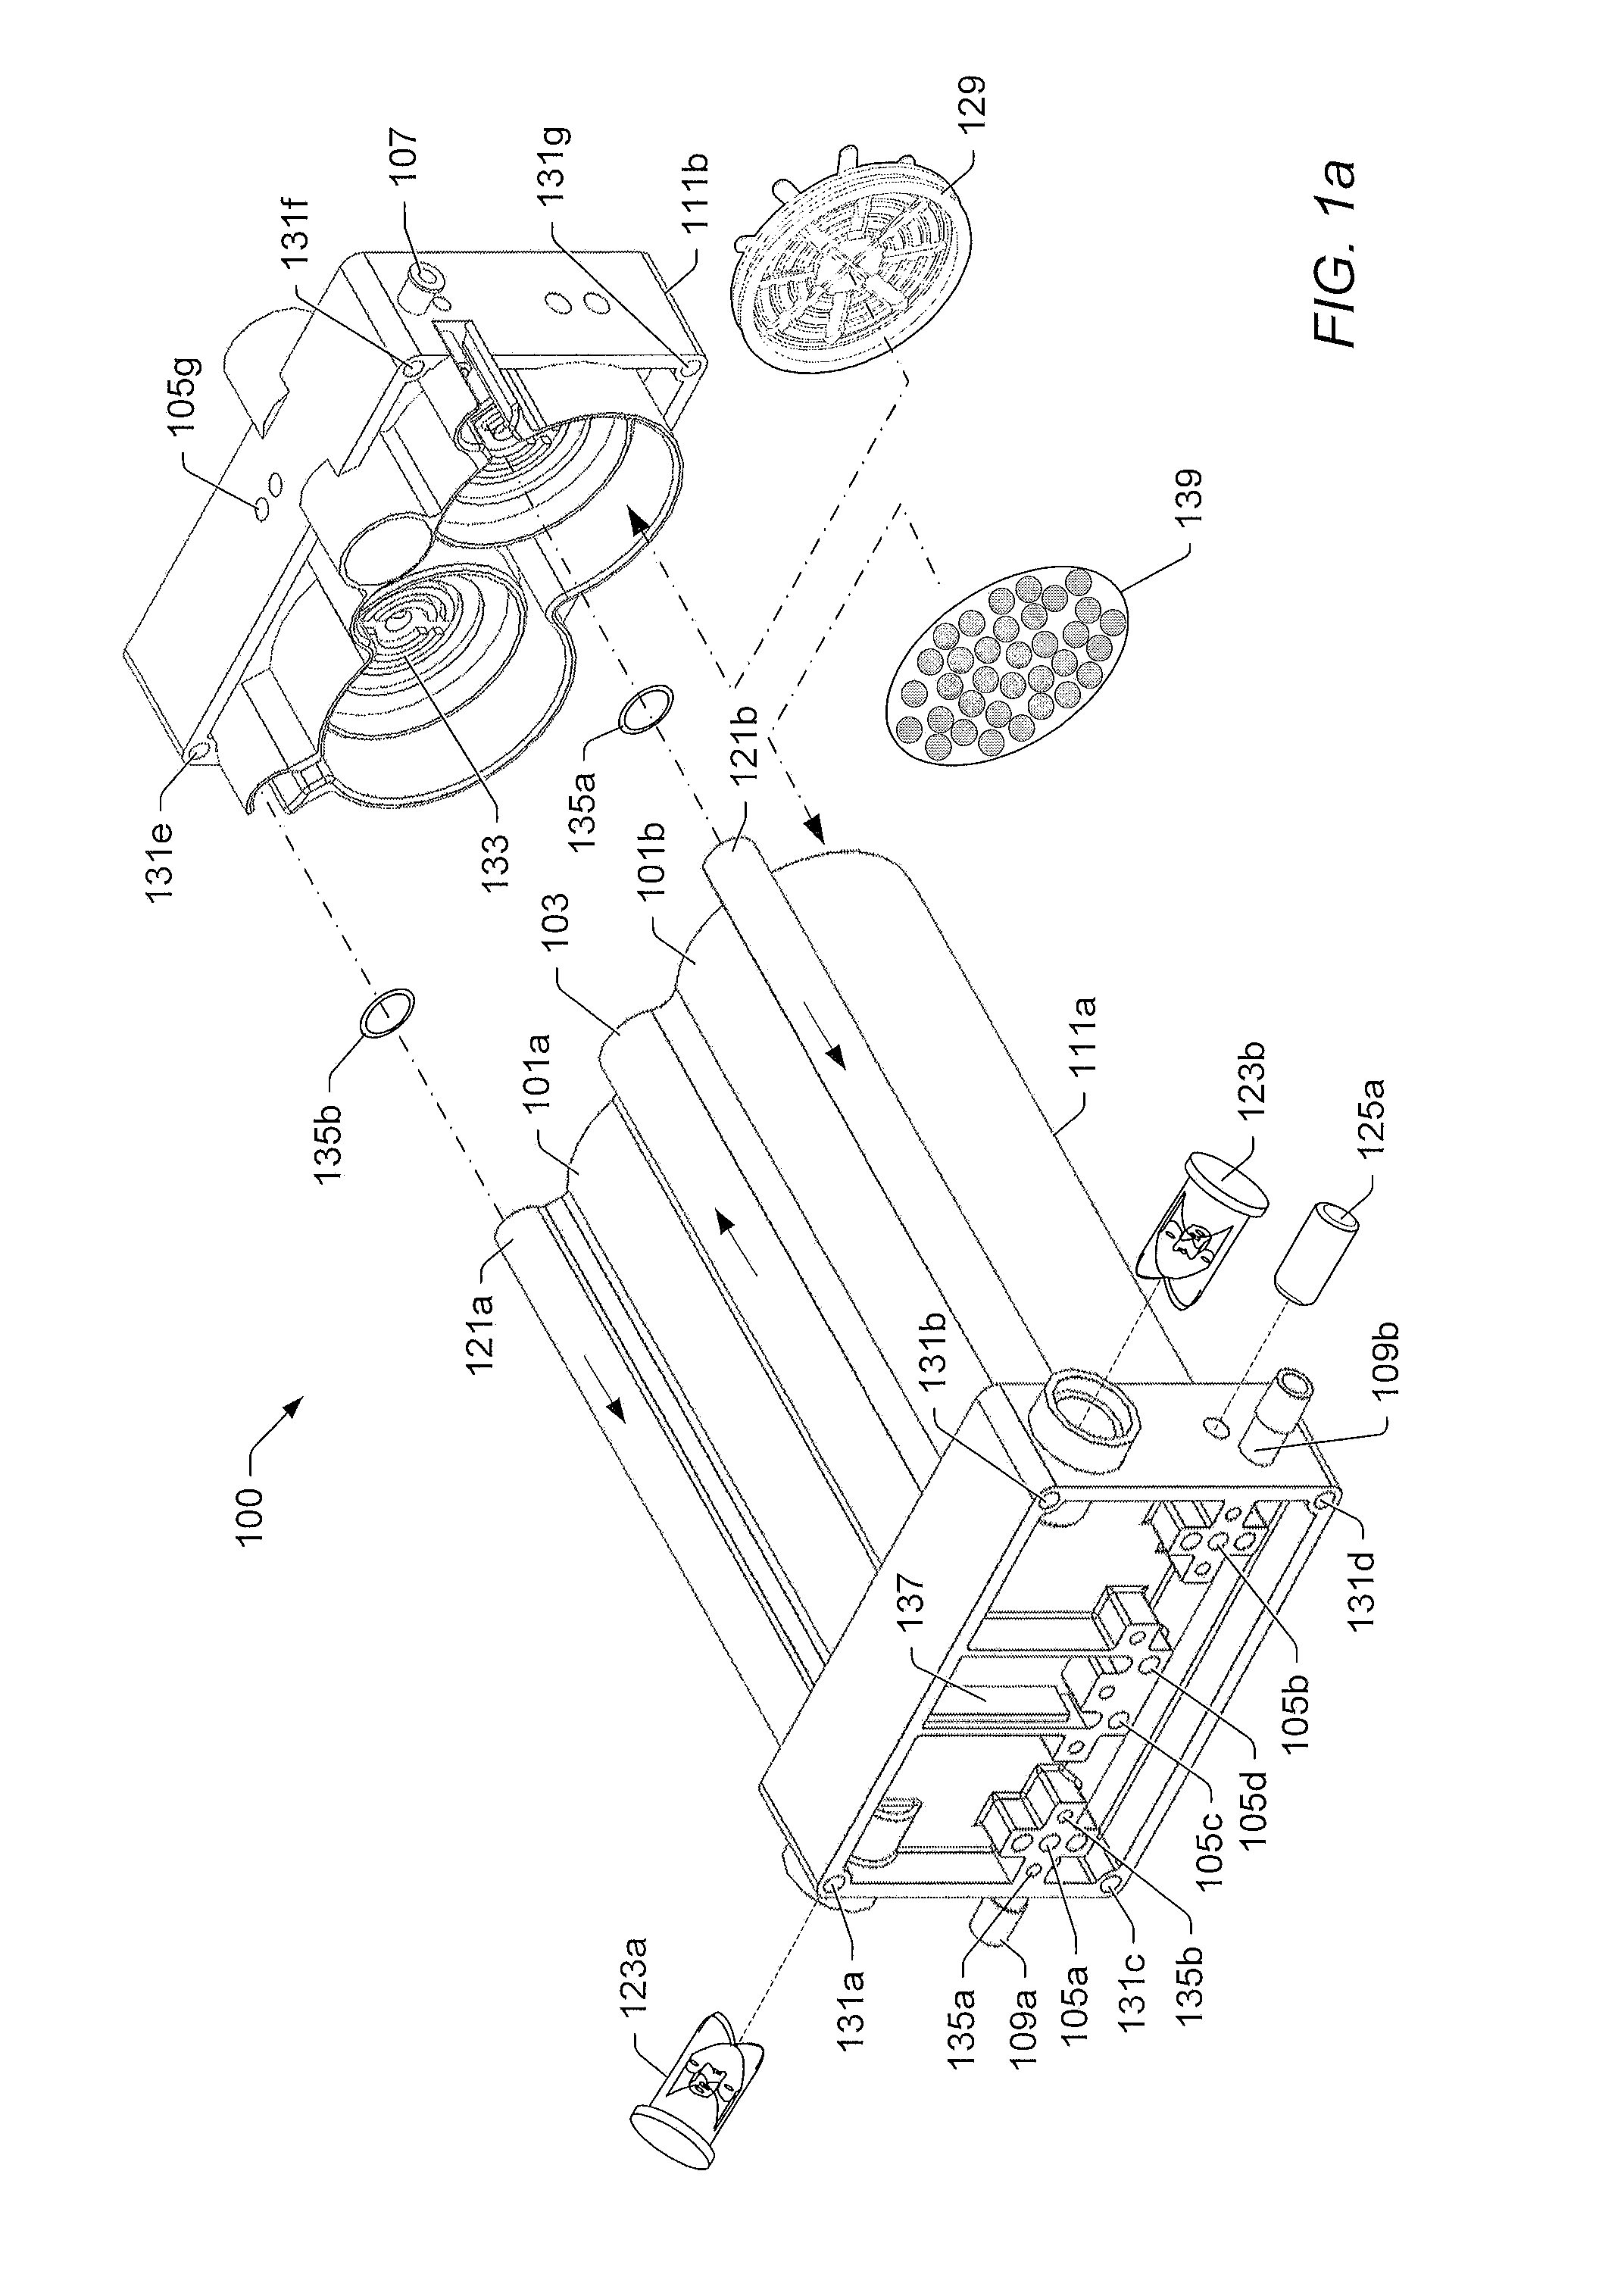 Oxygen concentrator apparatus and method having an ultrasonic detector